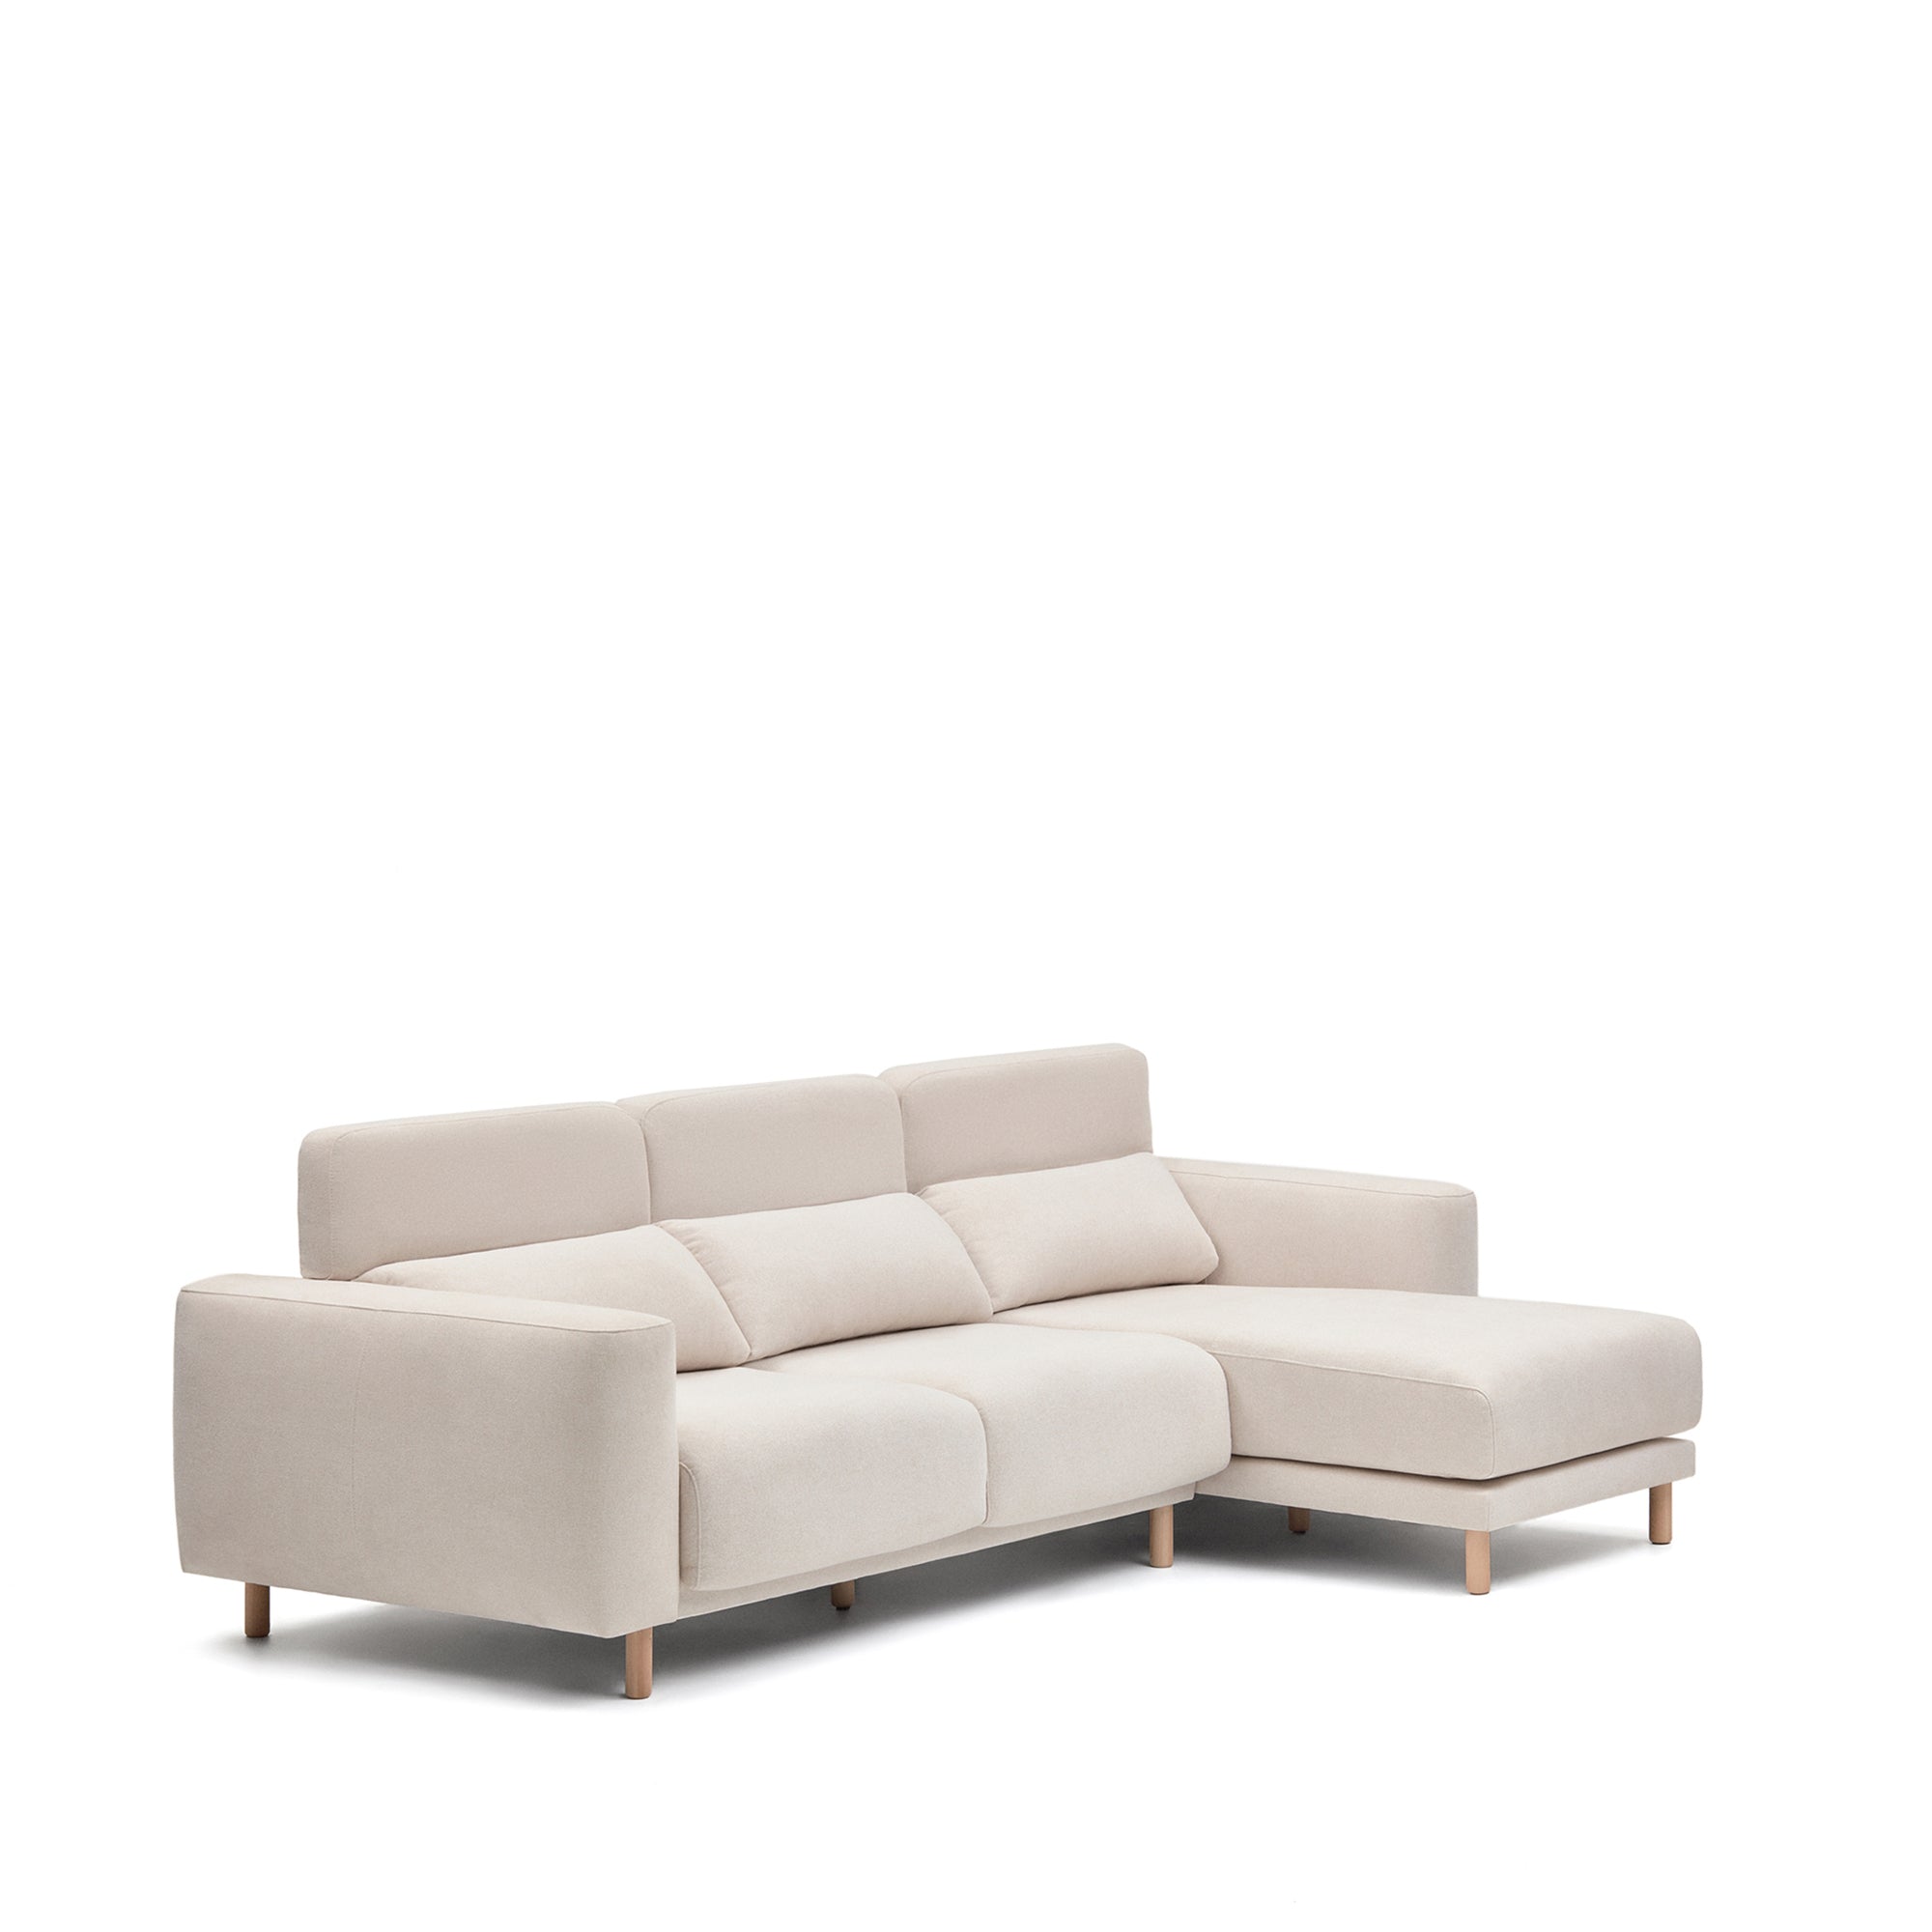 Singa 3 seater sofa with right-hand chaise longue in white, 296 cm